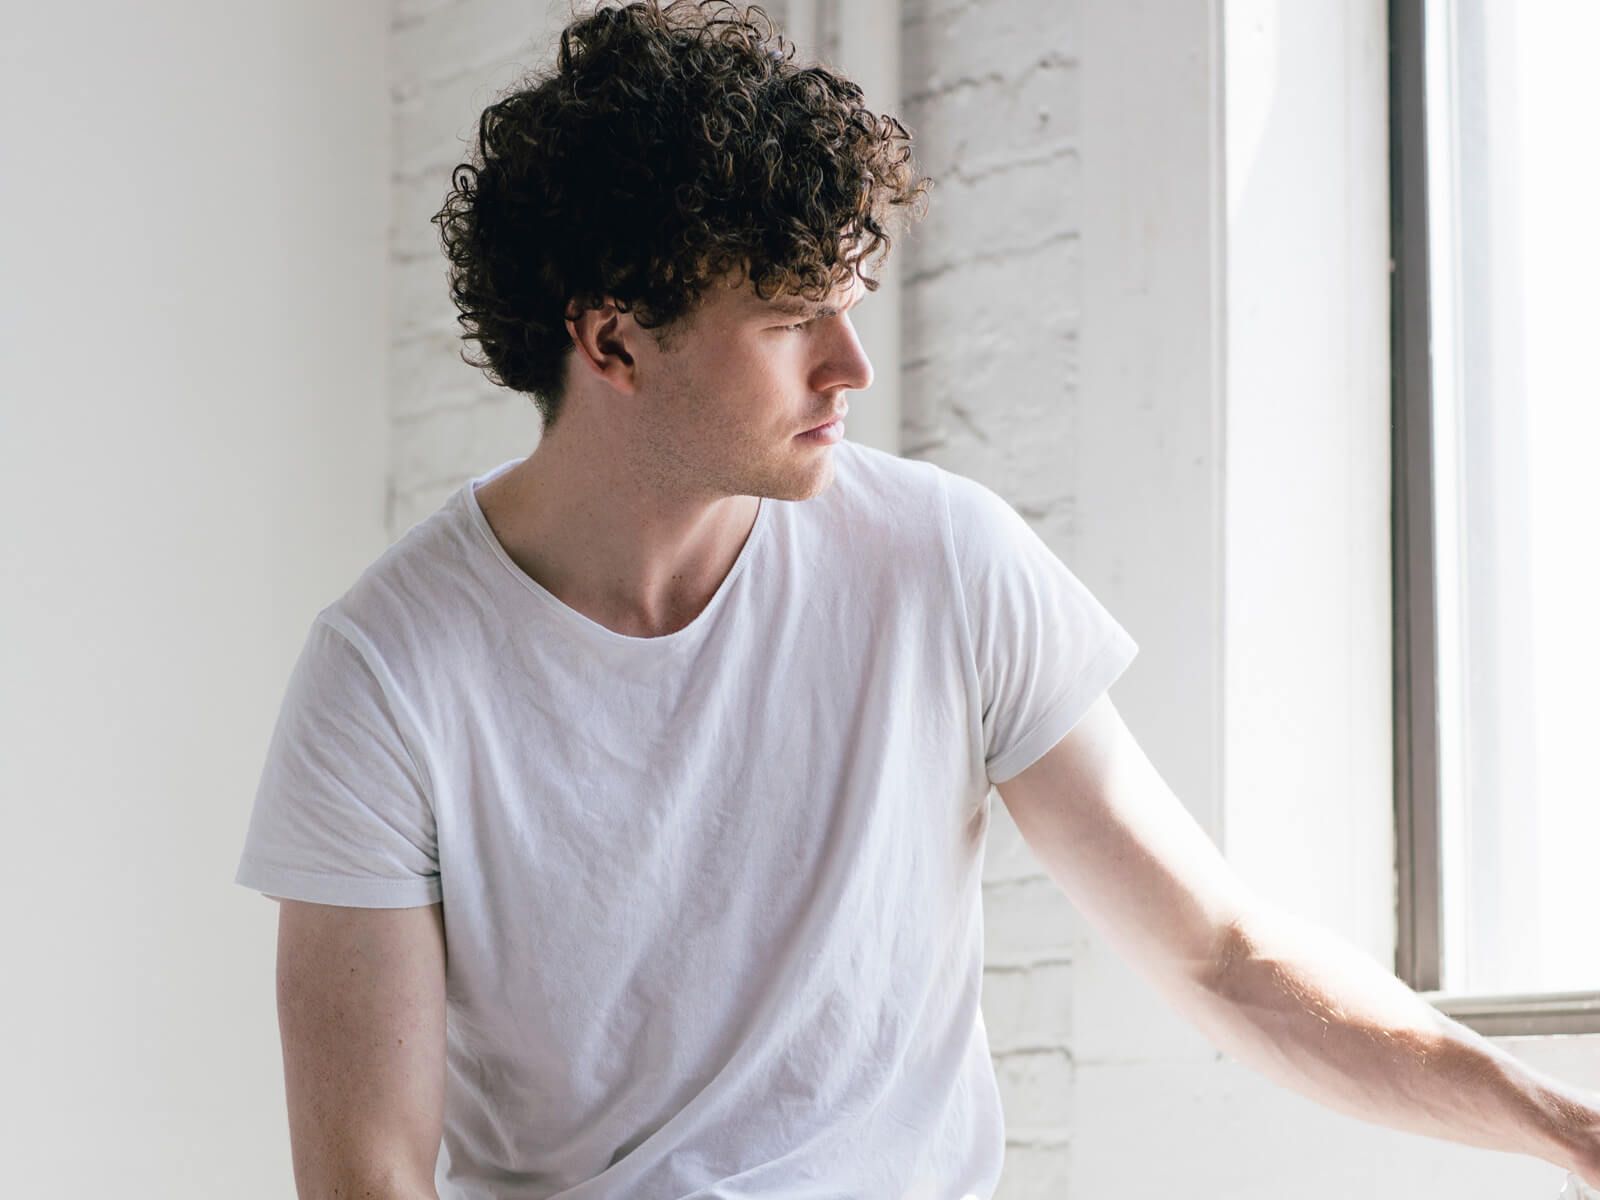 Essential Travel Tips from Vance Joy